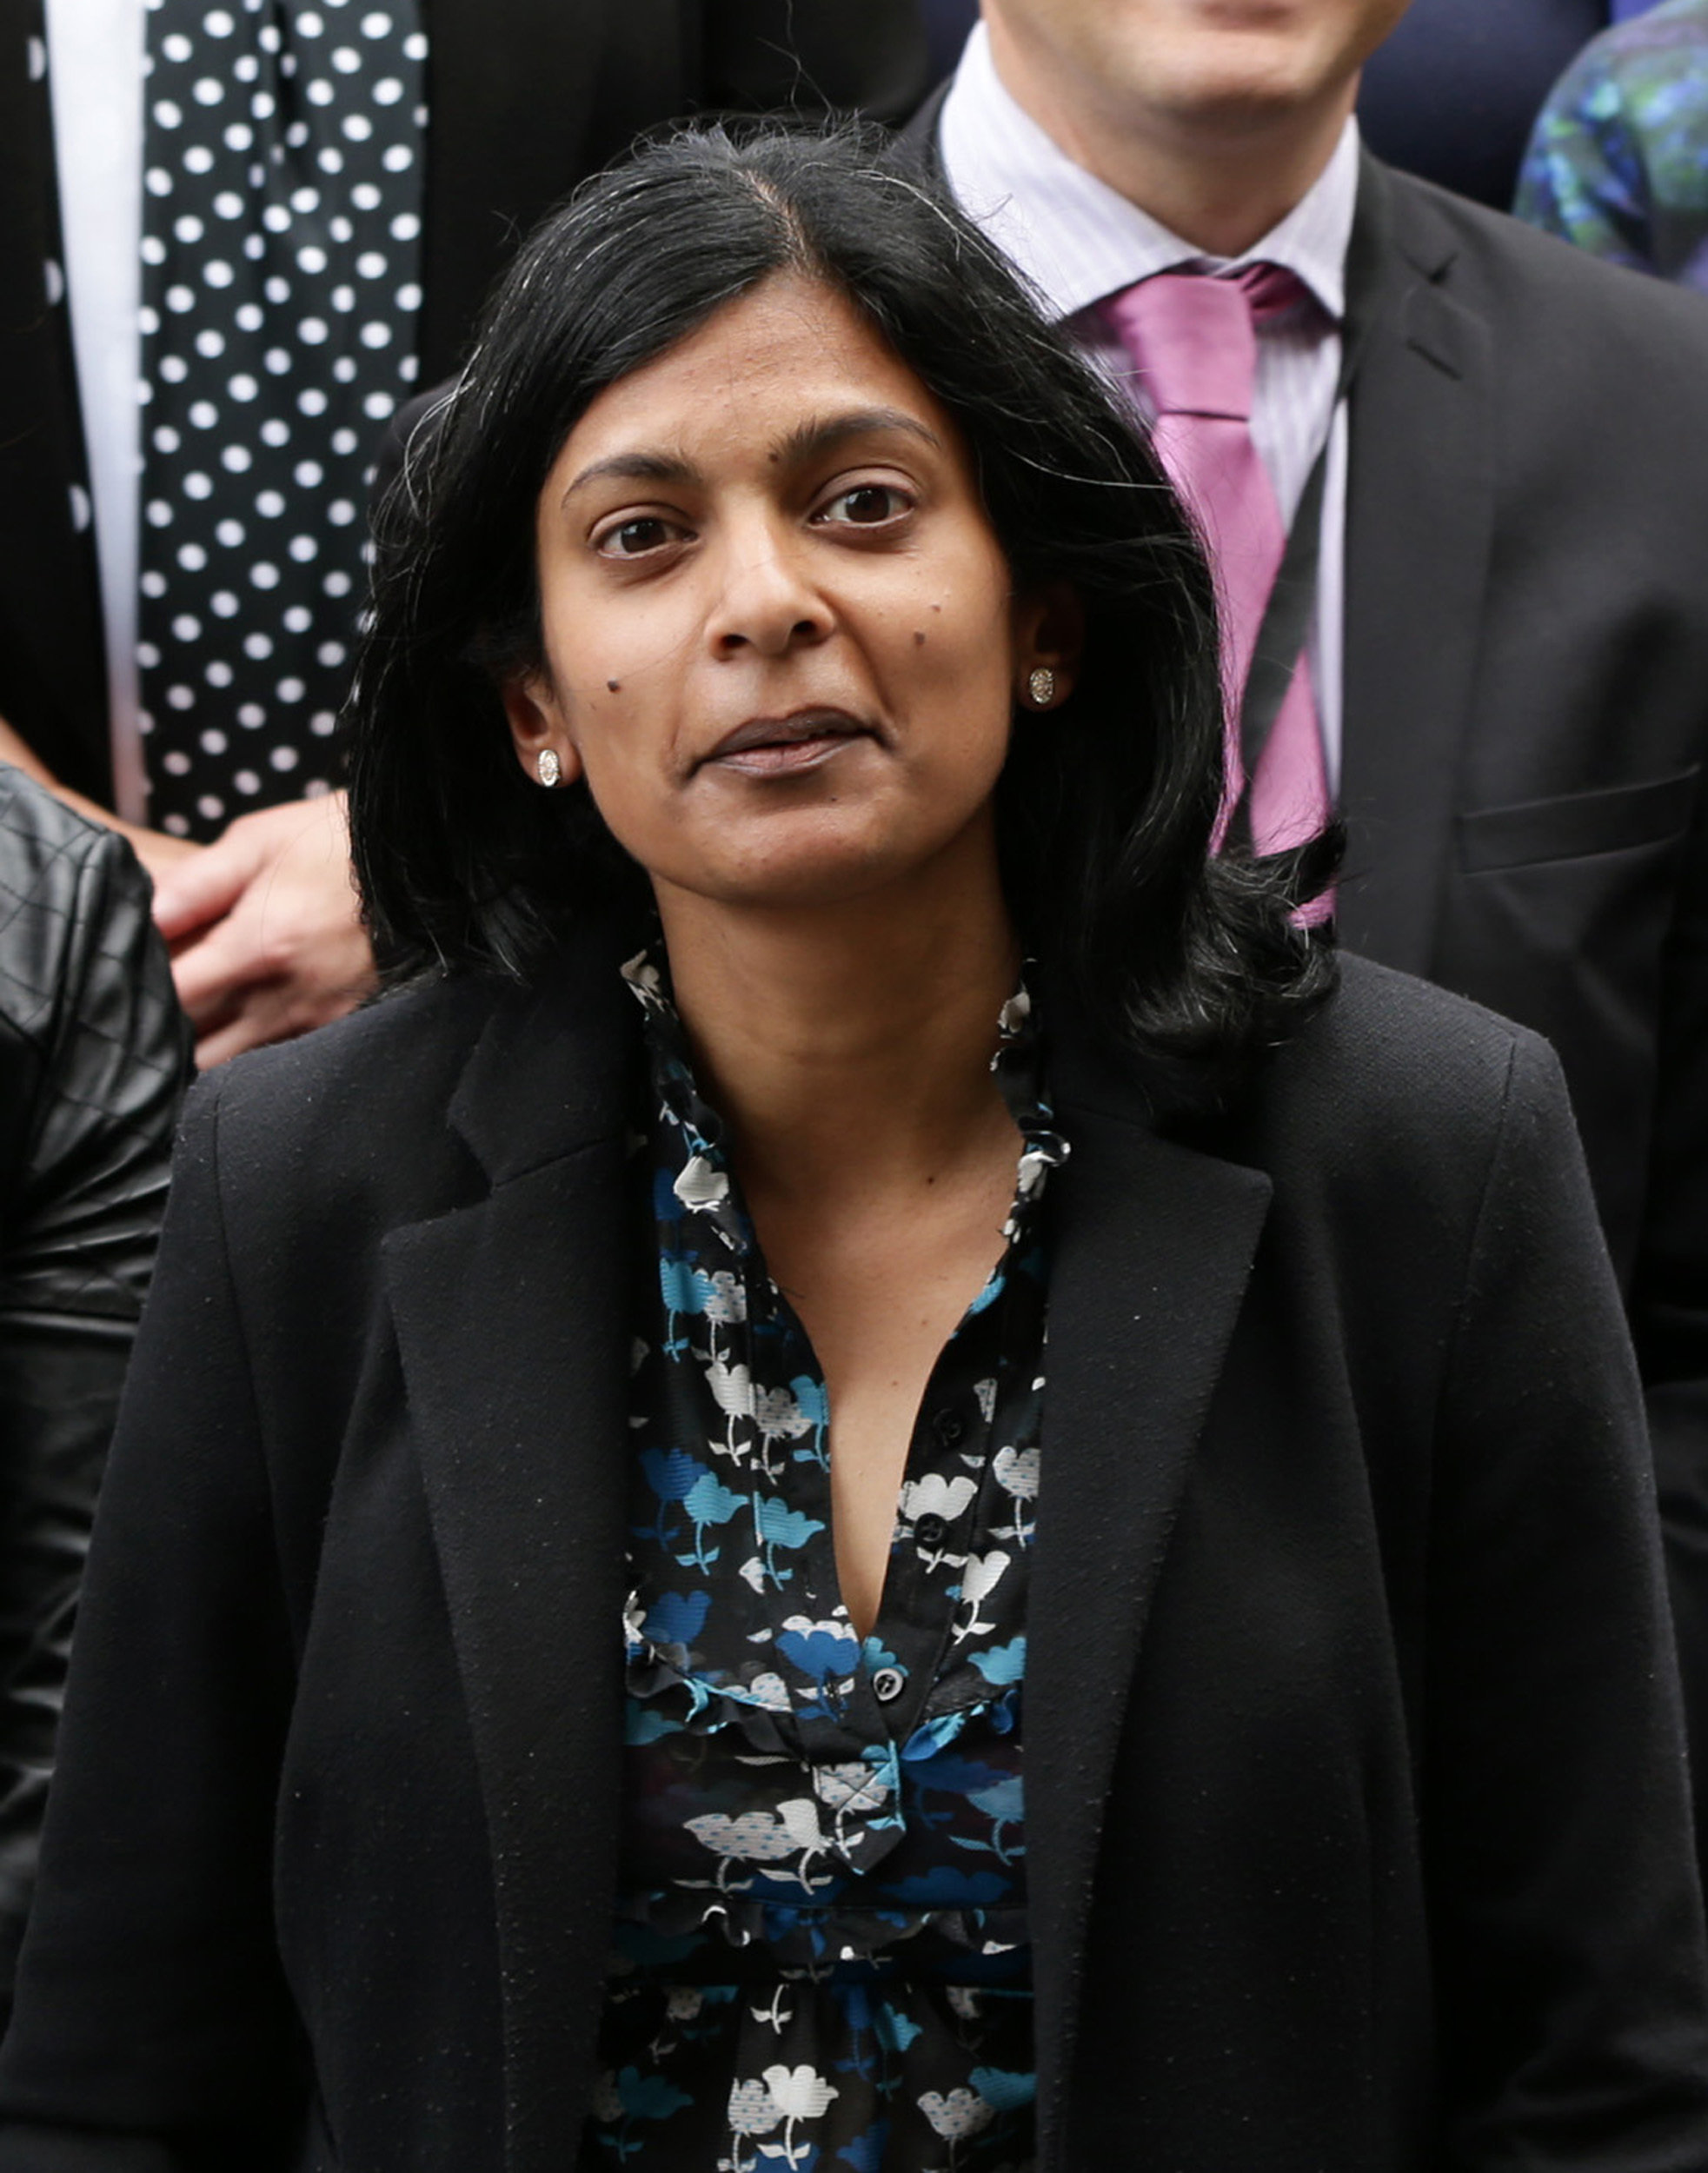 Ealing MP Rupa Huq wants a change in the law to prevent protests outside abortion clinics.